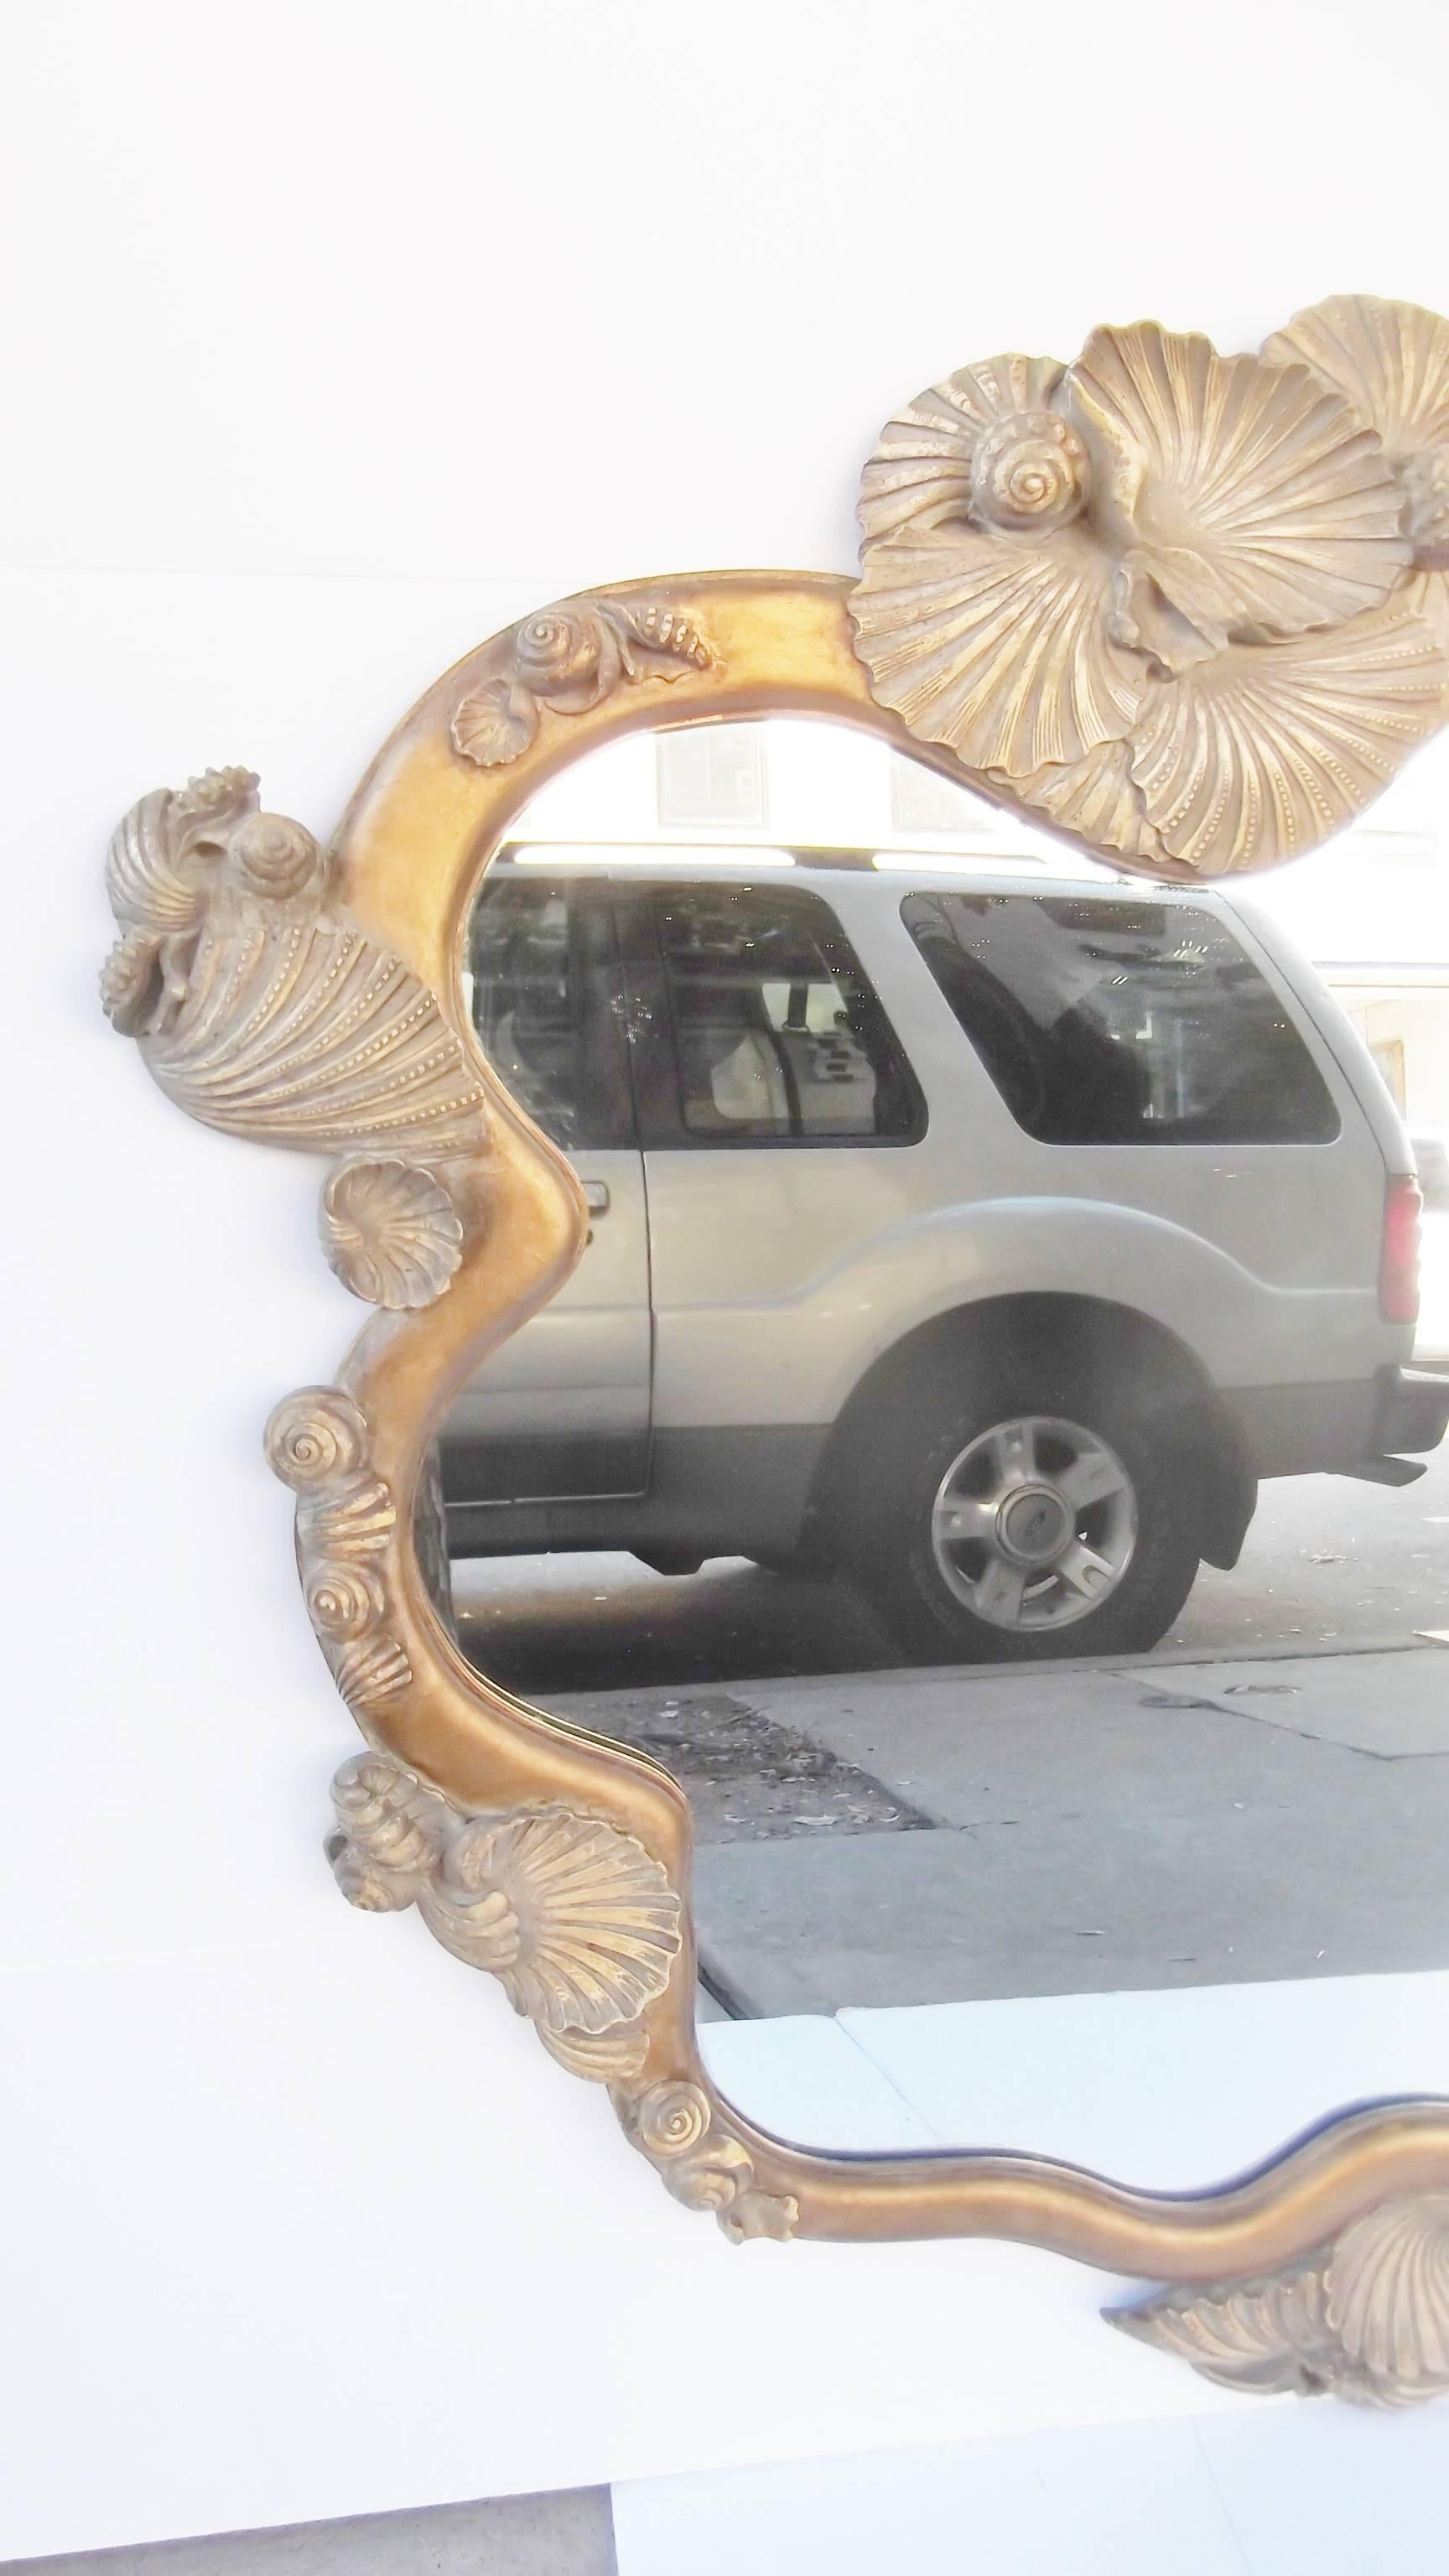 A very interesting shell design mirror, perfect for a beach home .The frame is wood and plaster with a dull matte finish to the frame.  The shapely shells are more of an Ivory Beige.  Large size with a free form overall shape.  The back is a secure